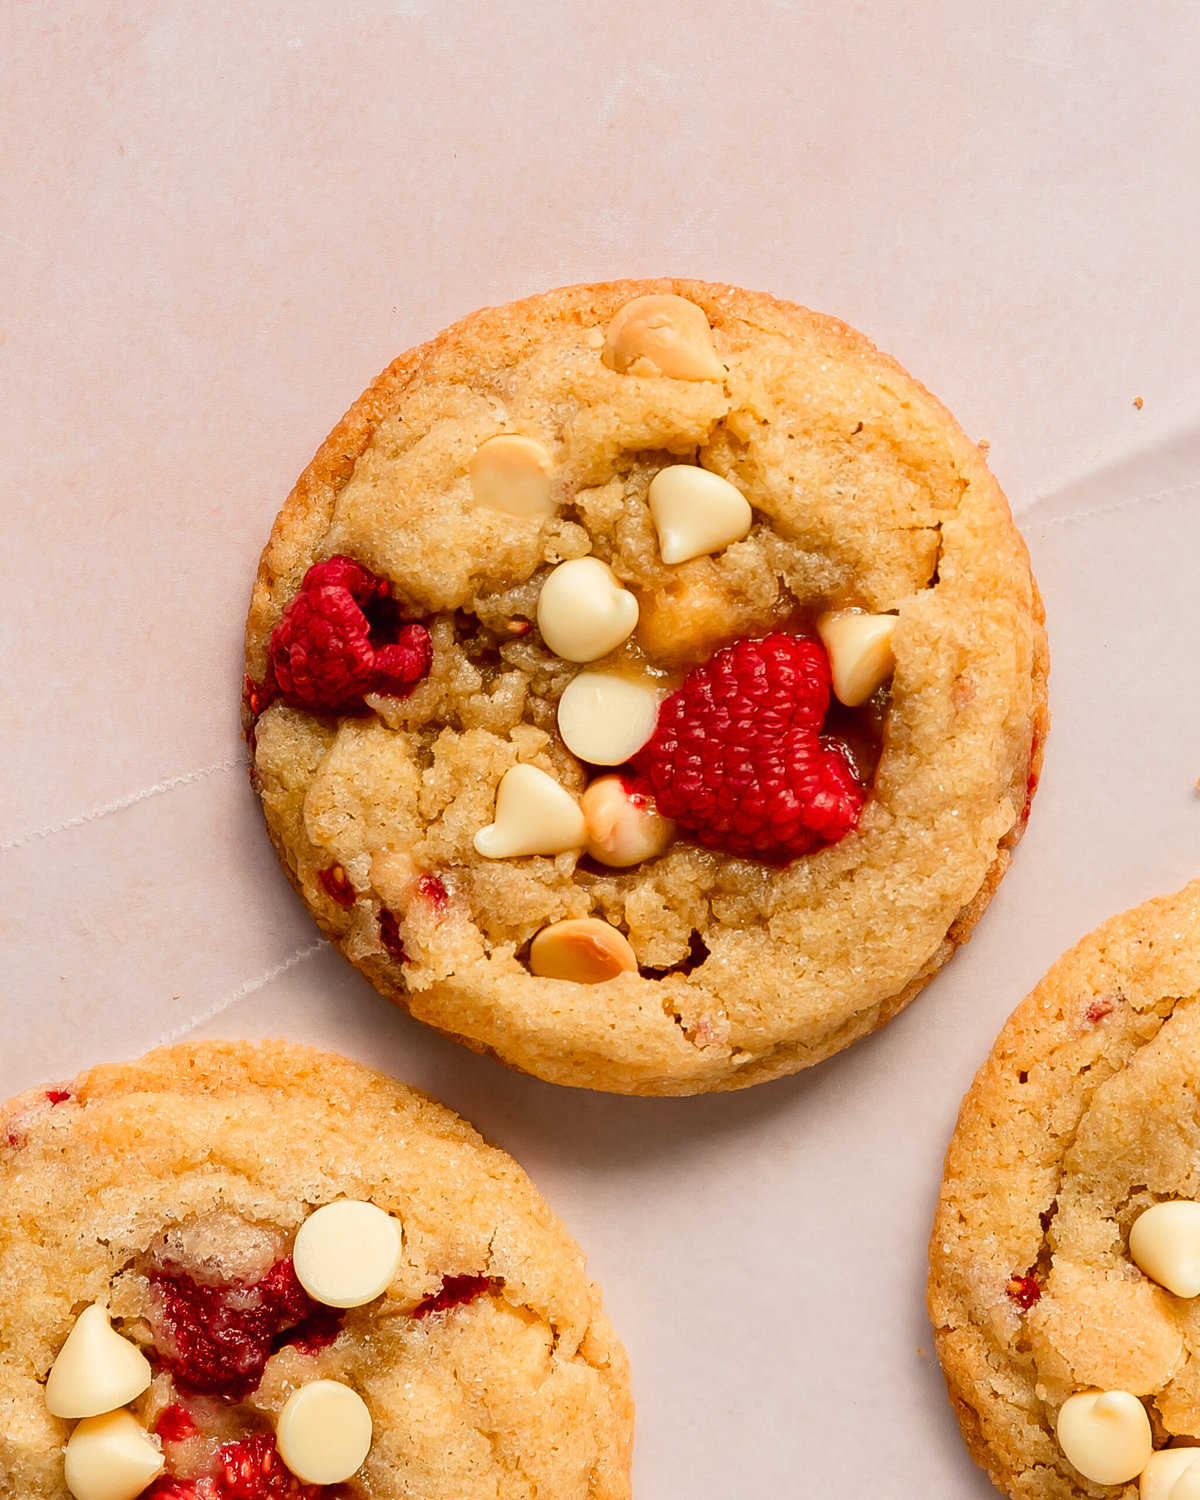 White chocolate raspberry cookies are soft, chewy and buttery sugar cookies filled with tart, juicy raspberries and creamy white chocolate. This raspberry white chocolate cookie recipe is no chill, quick and easy to make in one bowl.